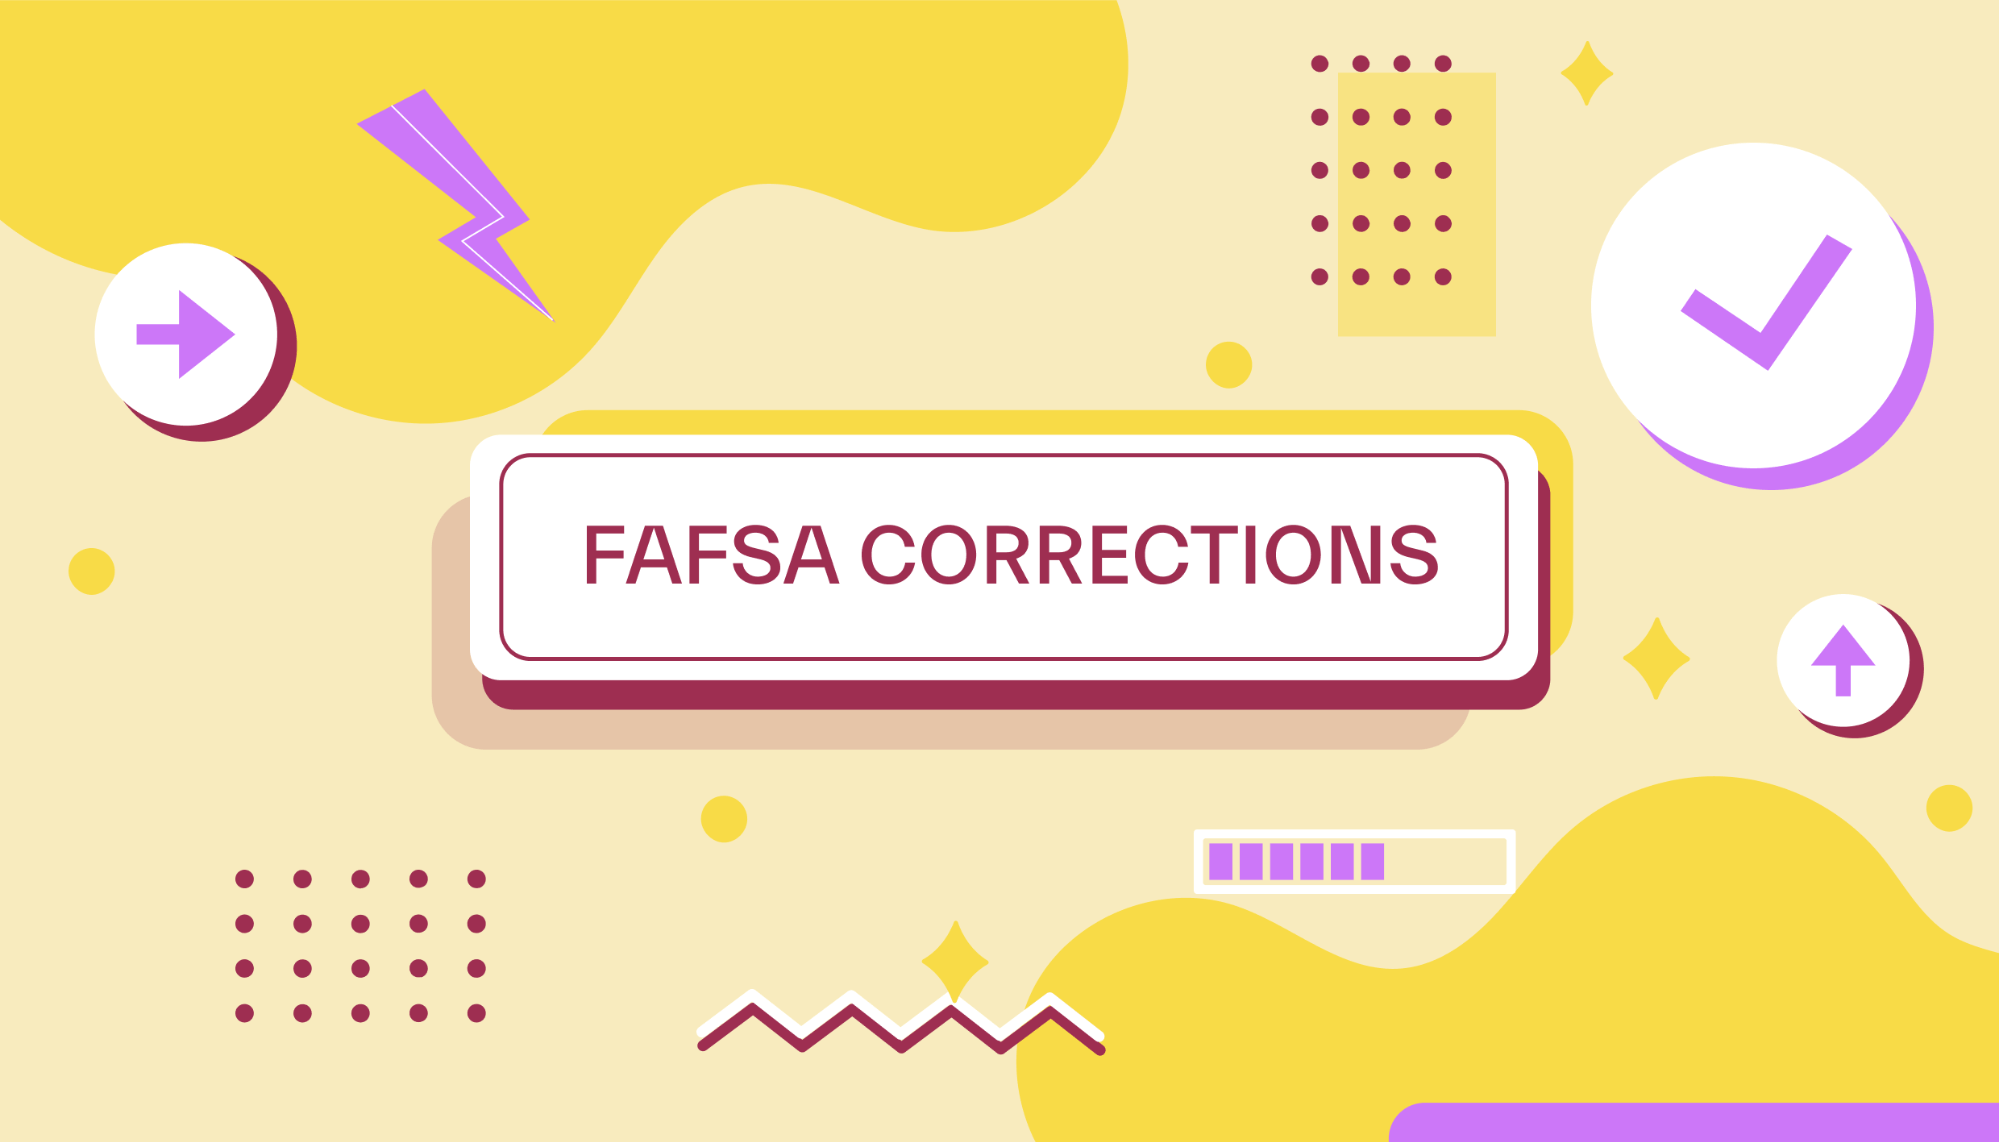 How to Make Corrections to Your FAFSA Application